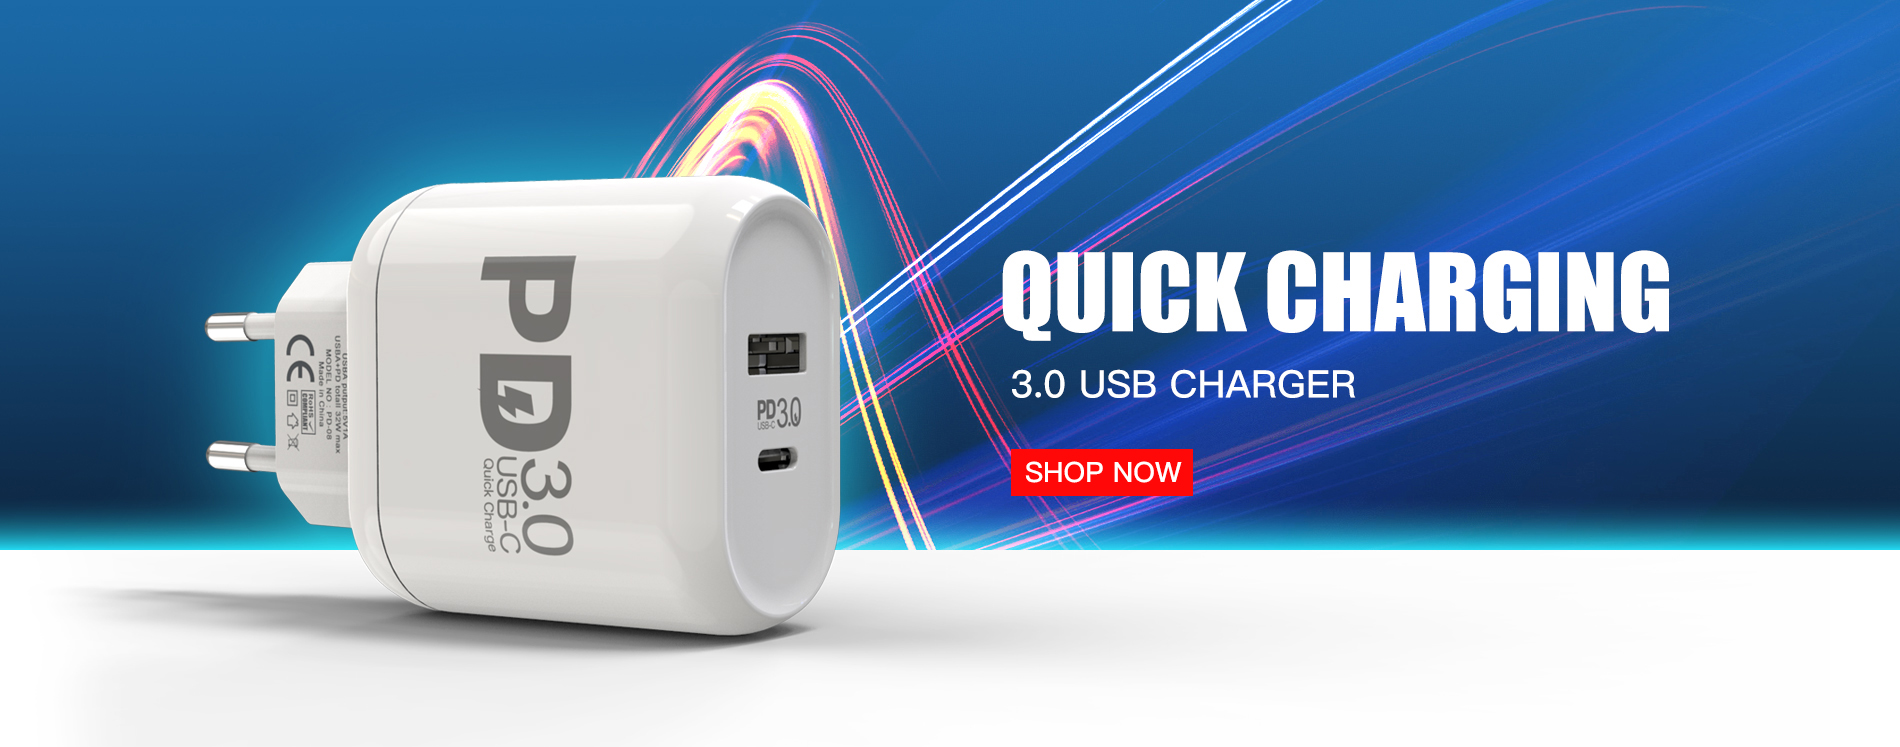 quick charger